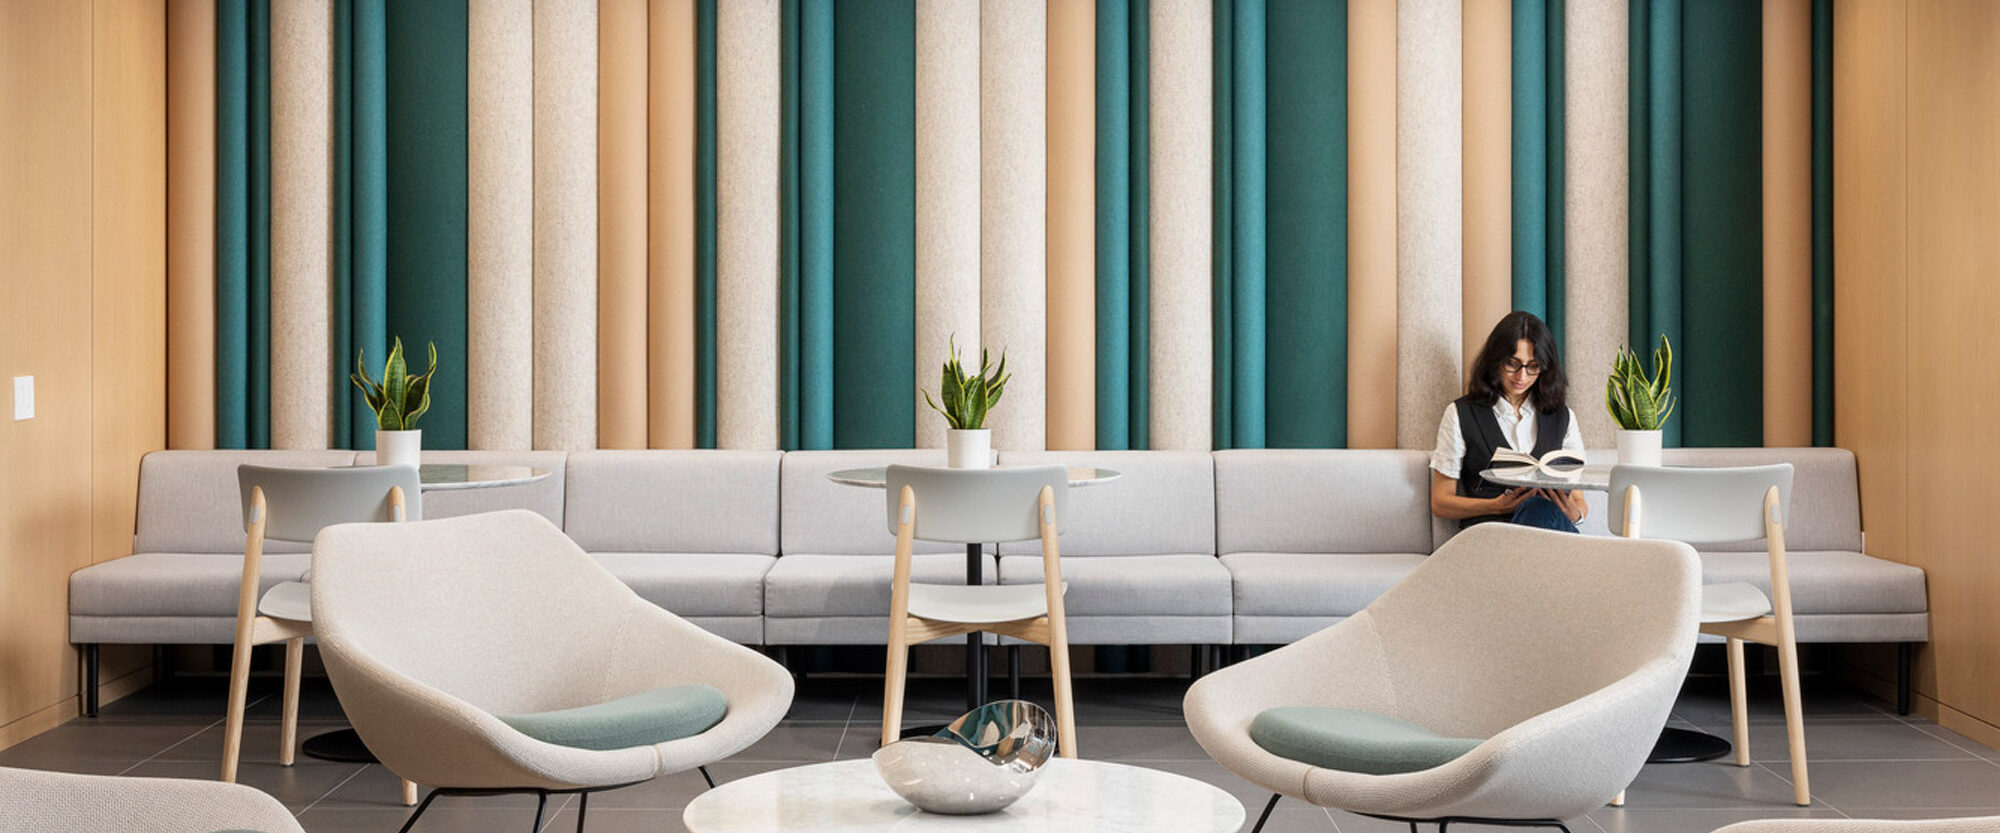 Contemporary waiting area with varied textures; soft beige couches complement wall panels in muted greens and creams. Overhead, a sleek white slatted ceiling contrasts the warm wooden floor. Central tables and modern lounge chairs offer a relaxed space for reading and work.